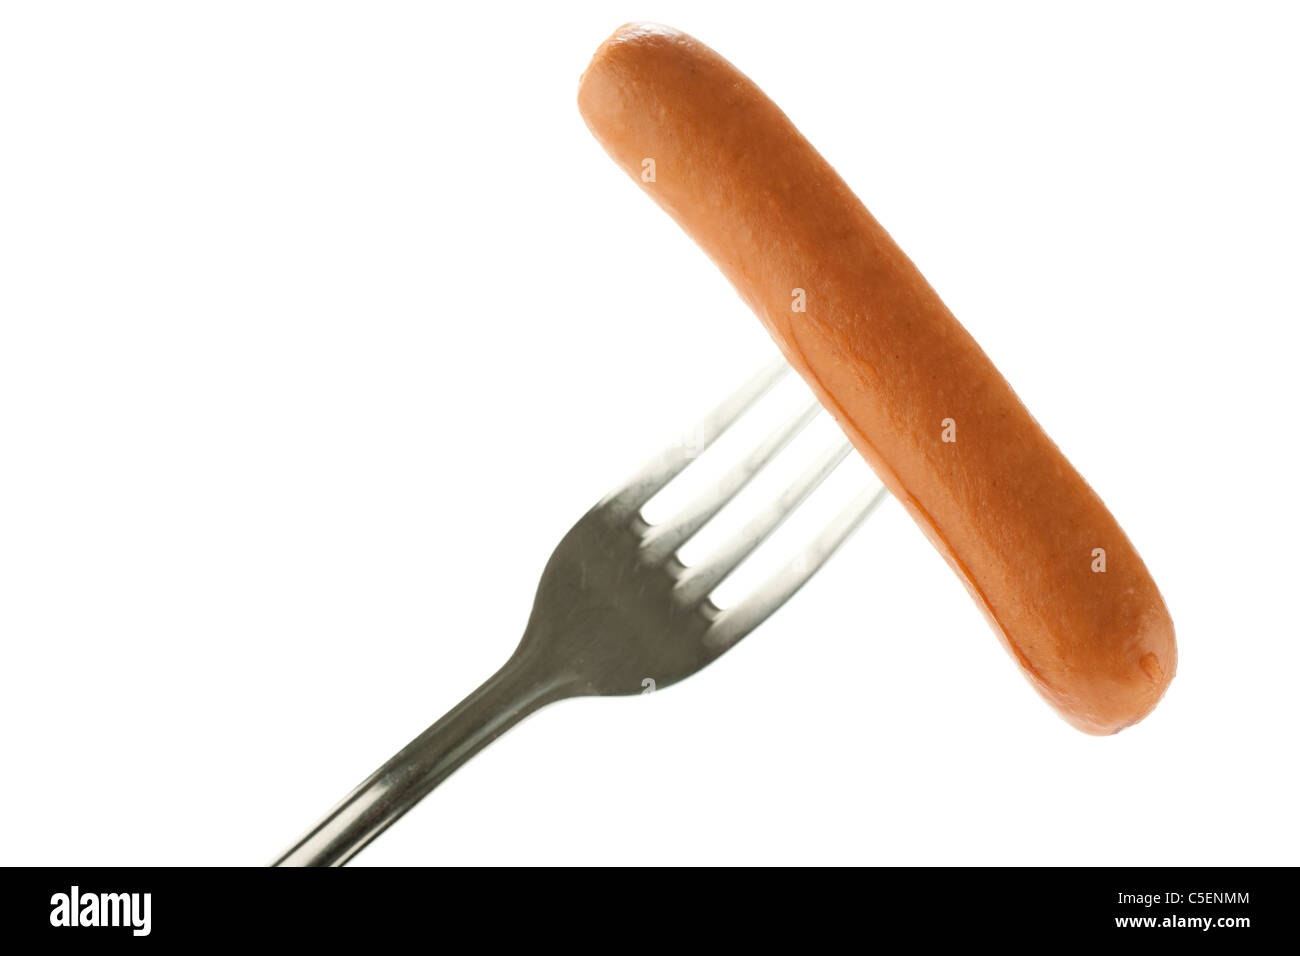 Hot dog sausage on a fork Stock Photo